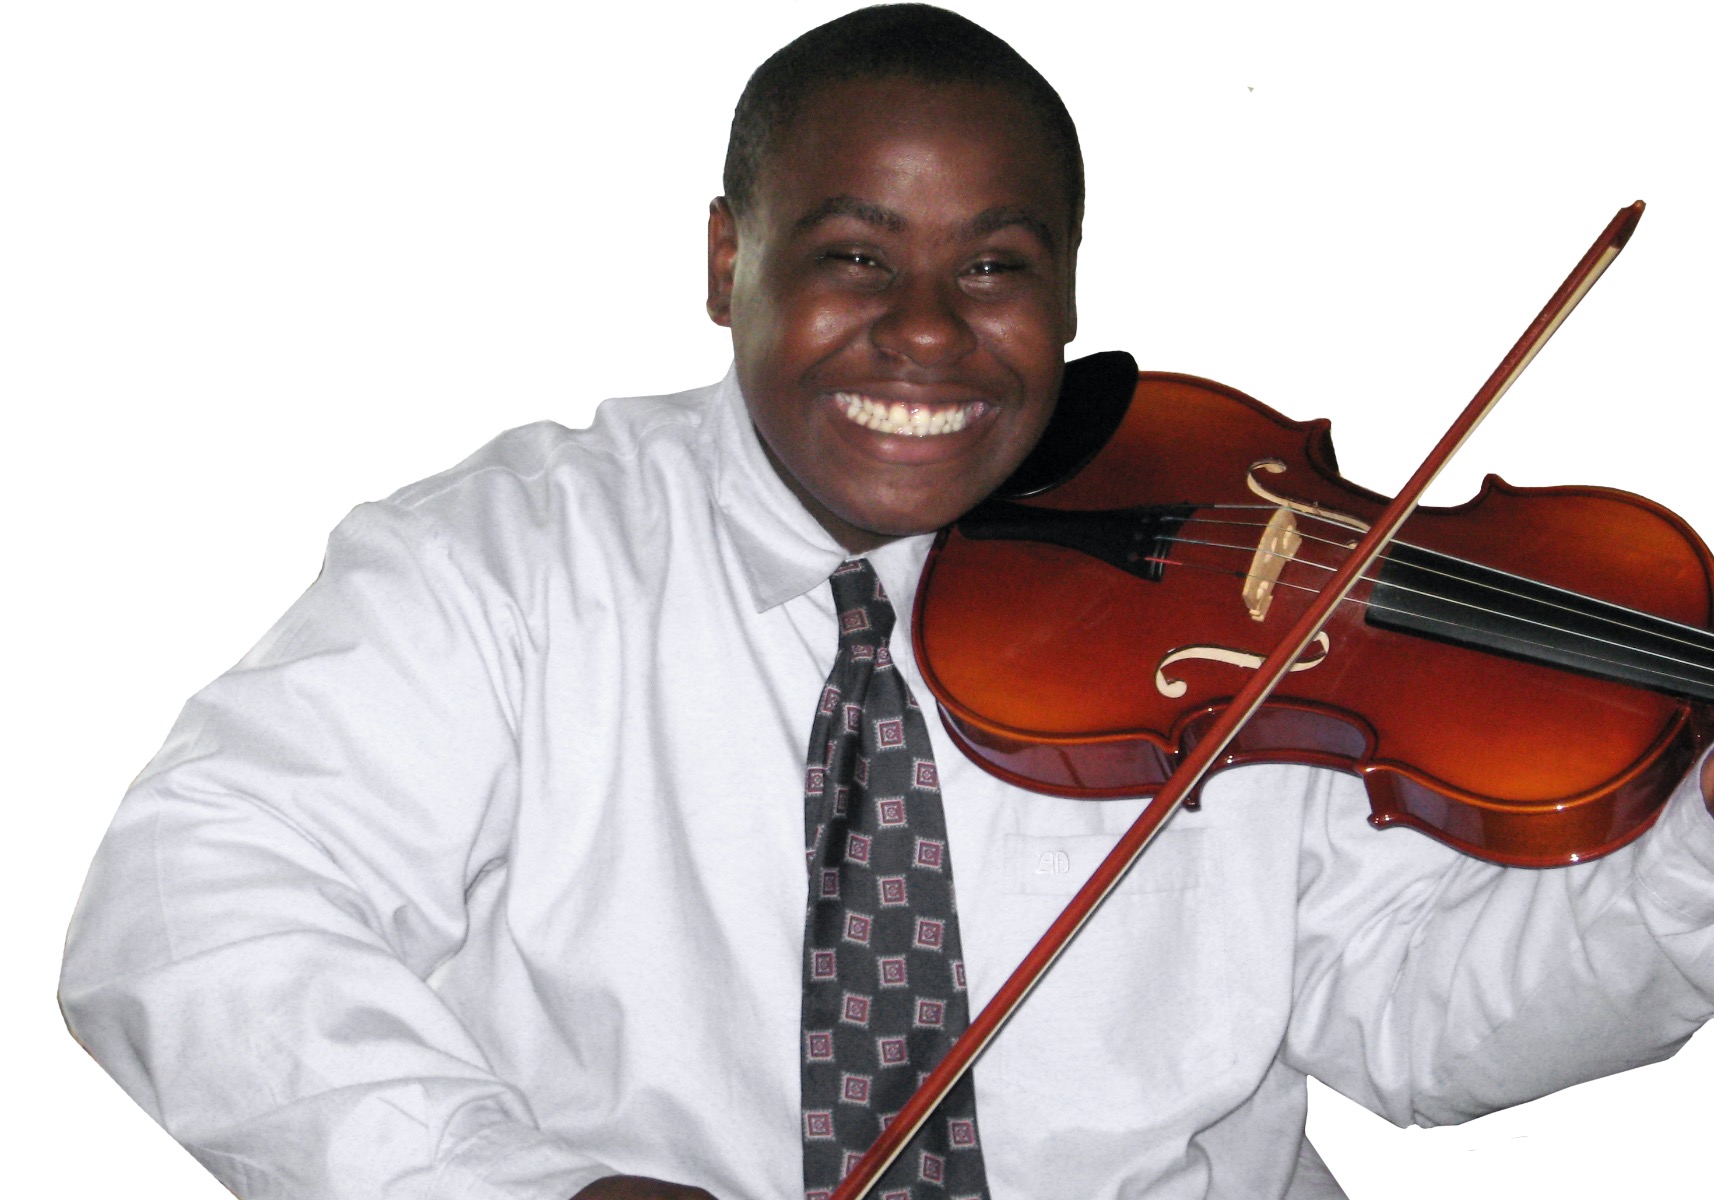 Smiling teenager in a school uniform playing violin